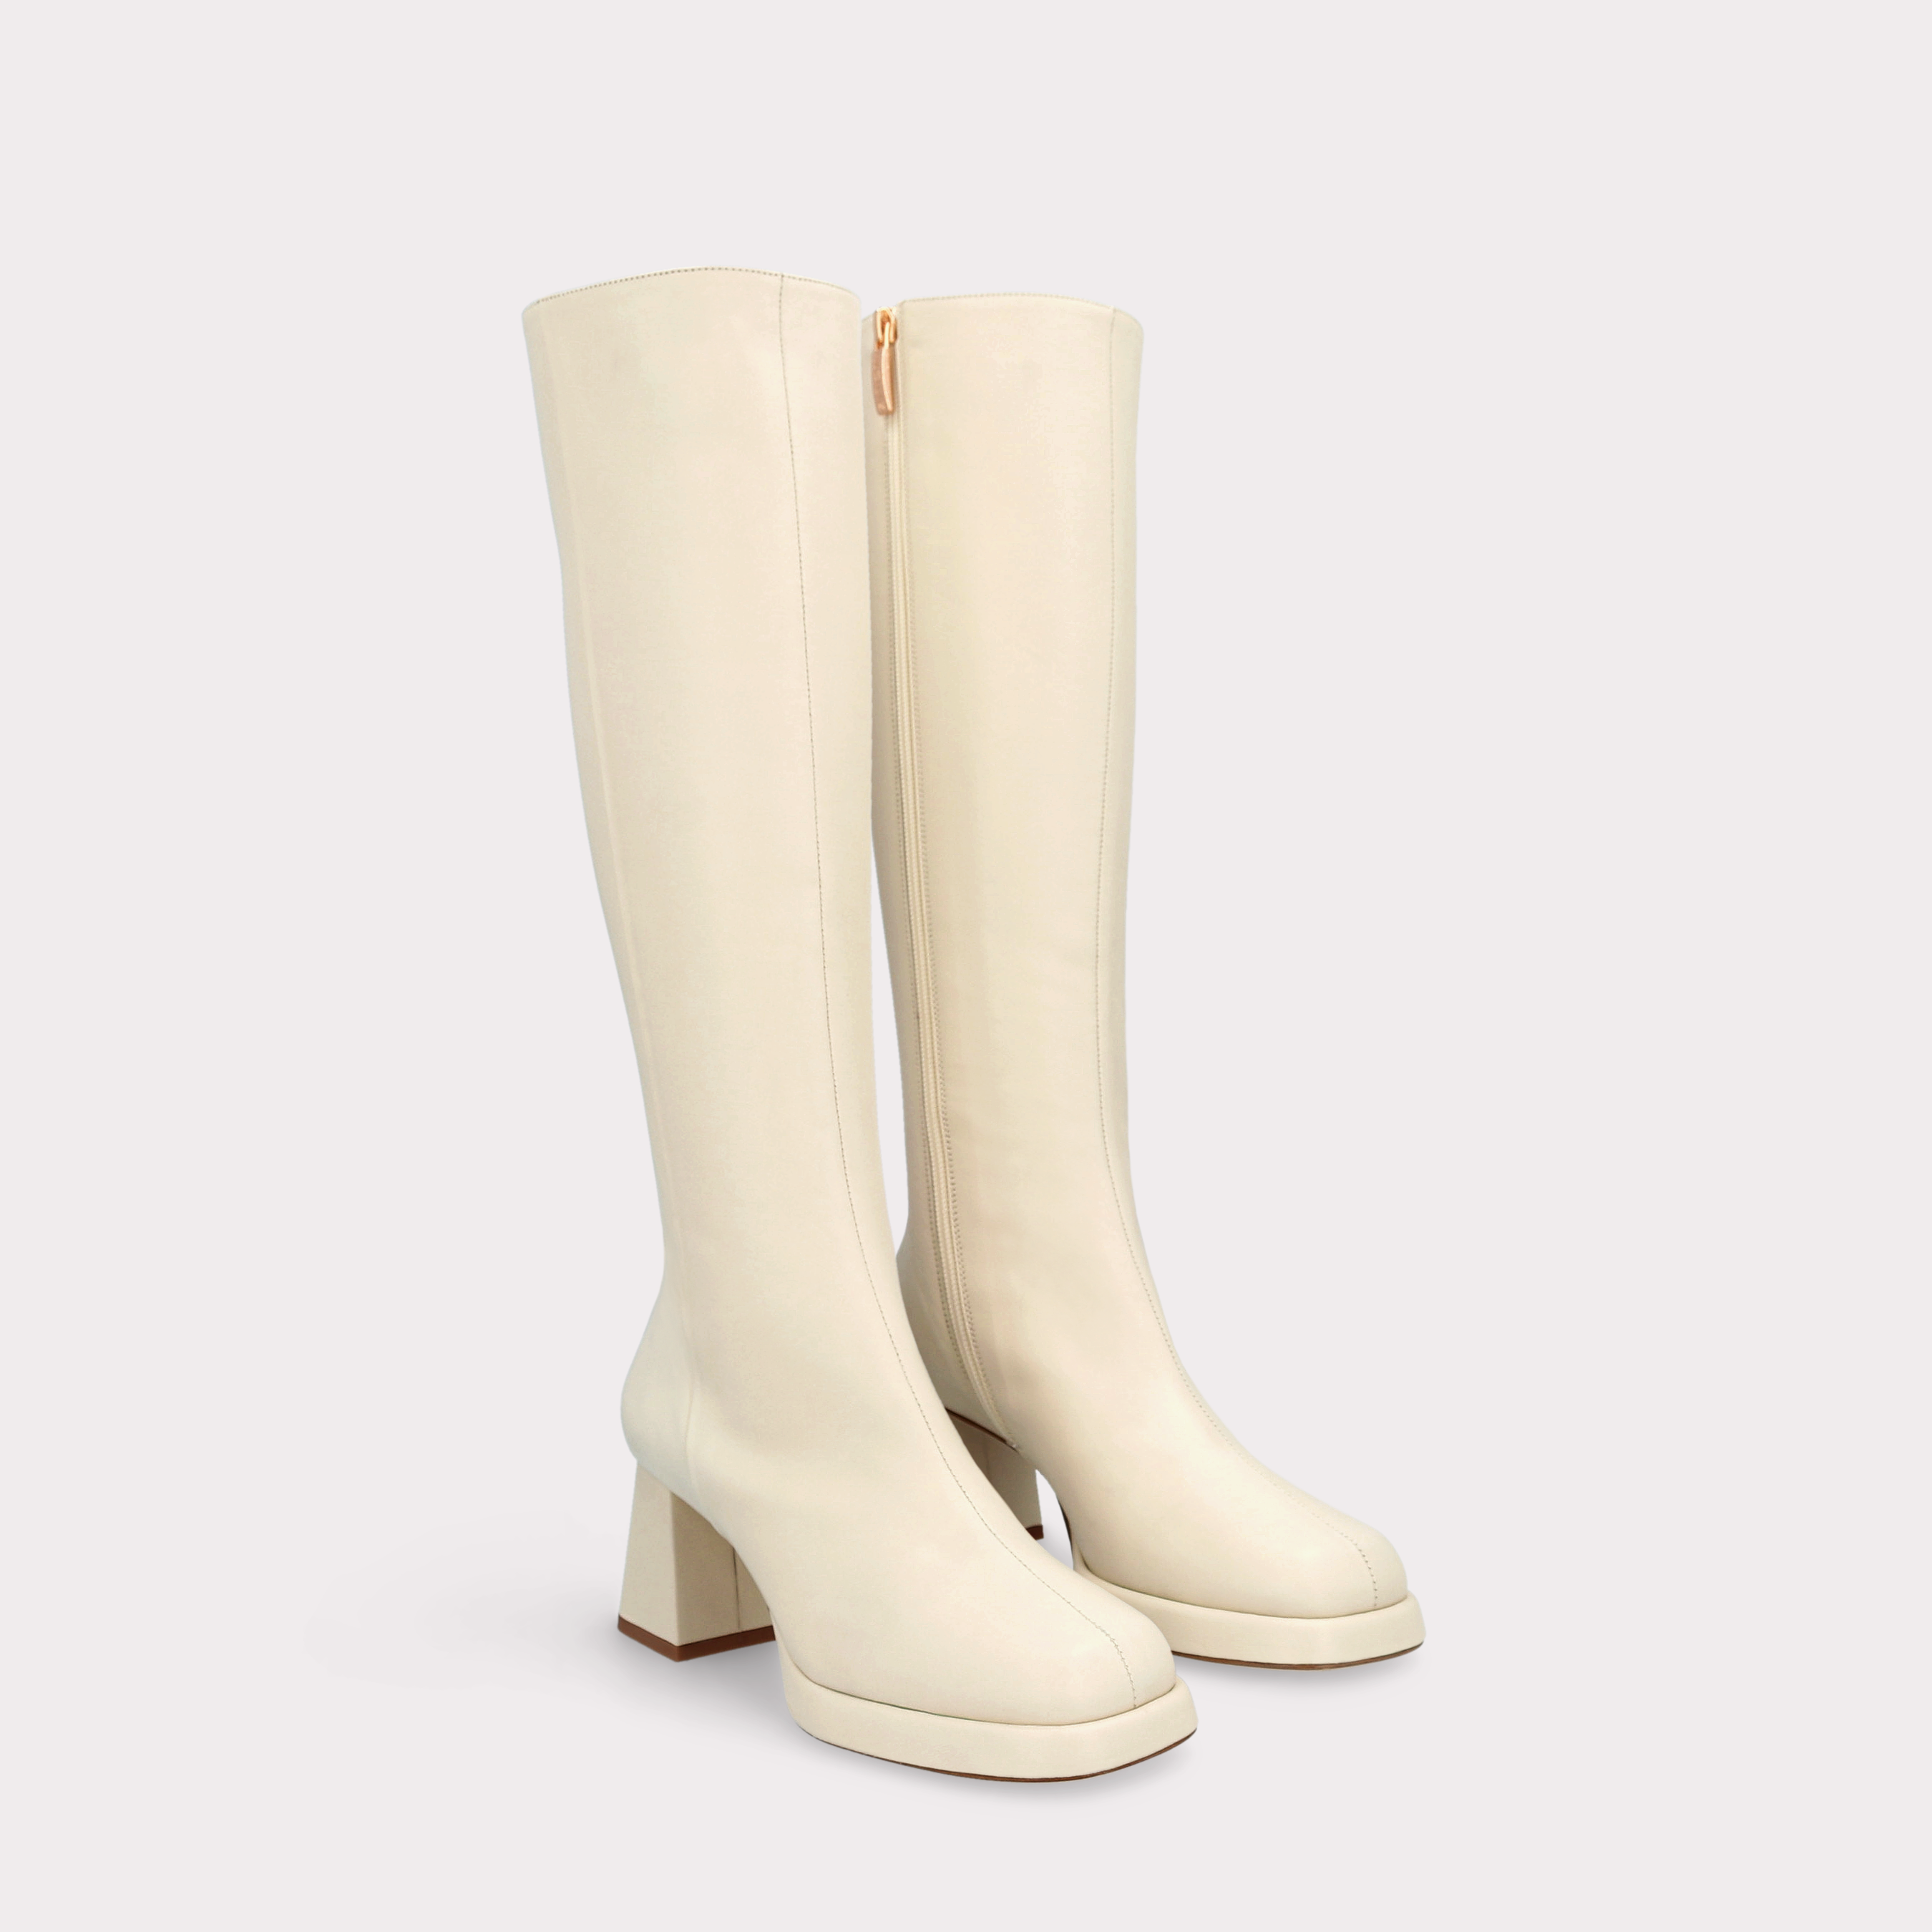 CONNIE 01 IVORY SMOOTH LEATHER PLATFORM BOOTS